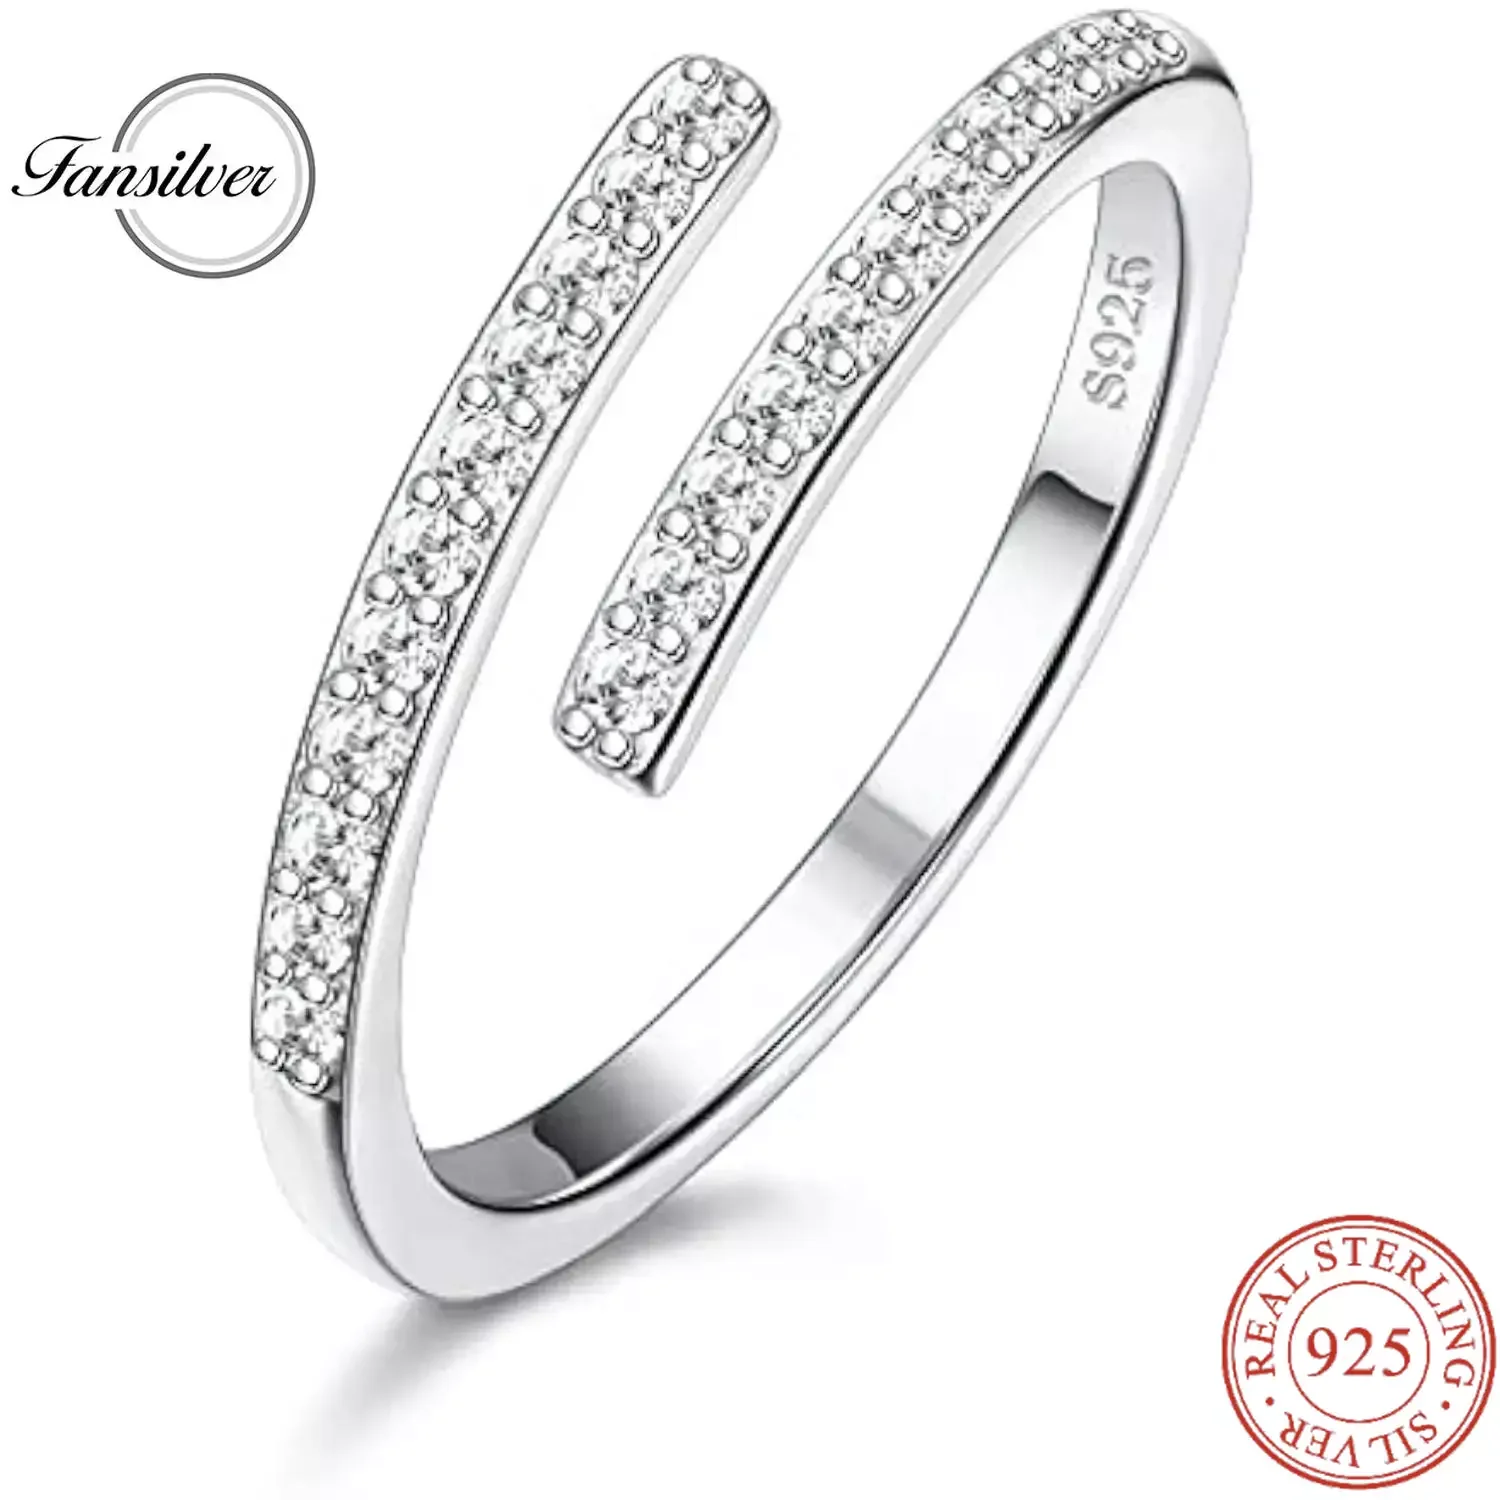 

Fansilver 1pc 925 Sterling Silver Ring for Women Adjustable Cubic Zirconia Rings 2MM CZ Minimalist Open Ring for Gift